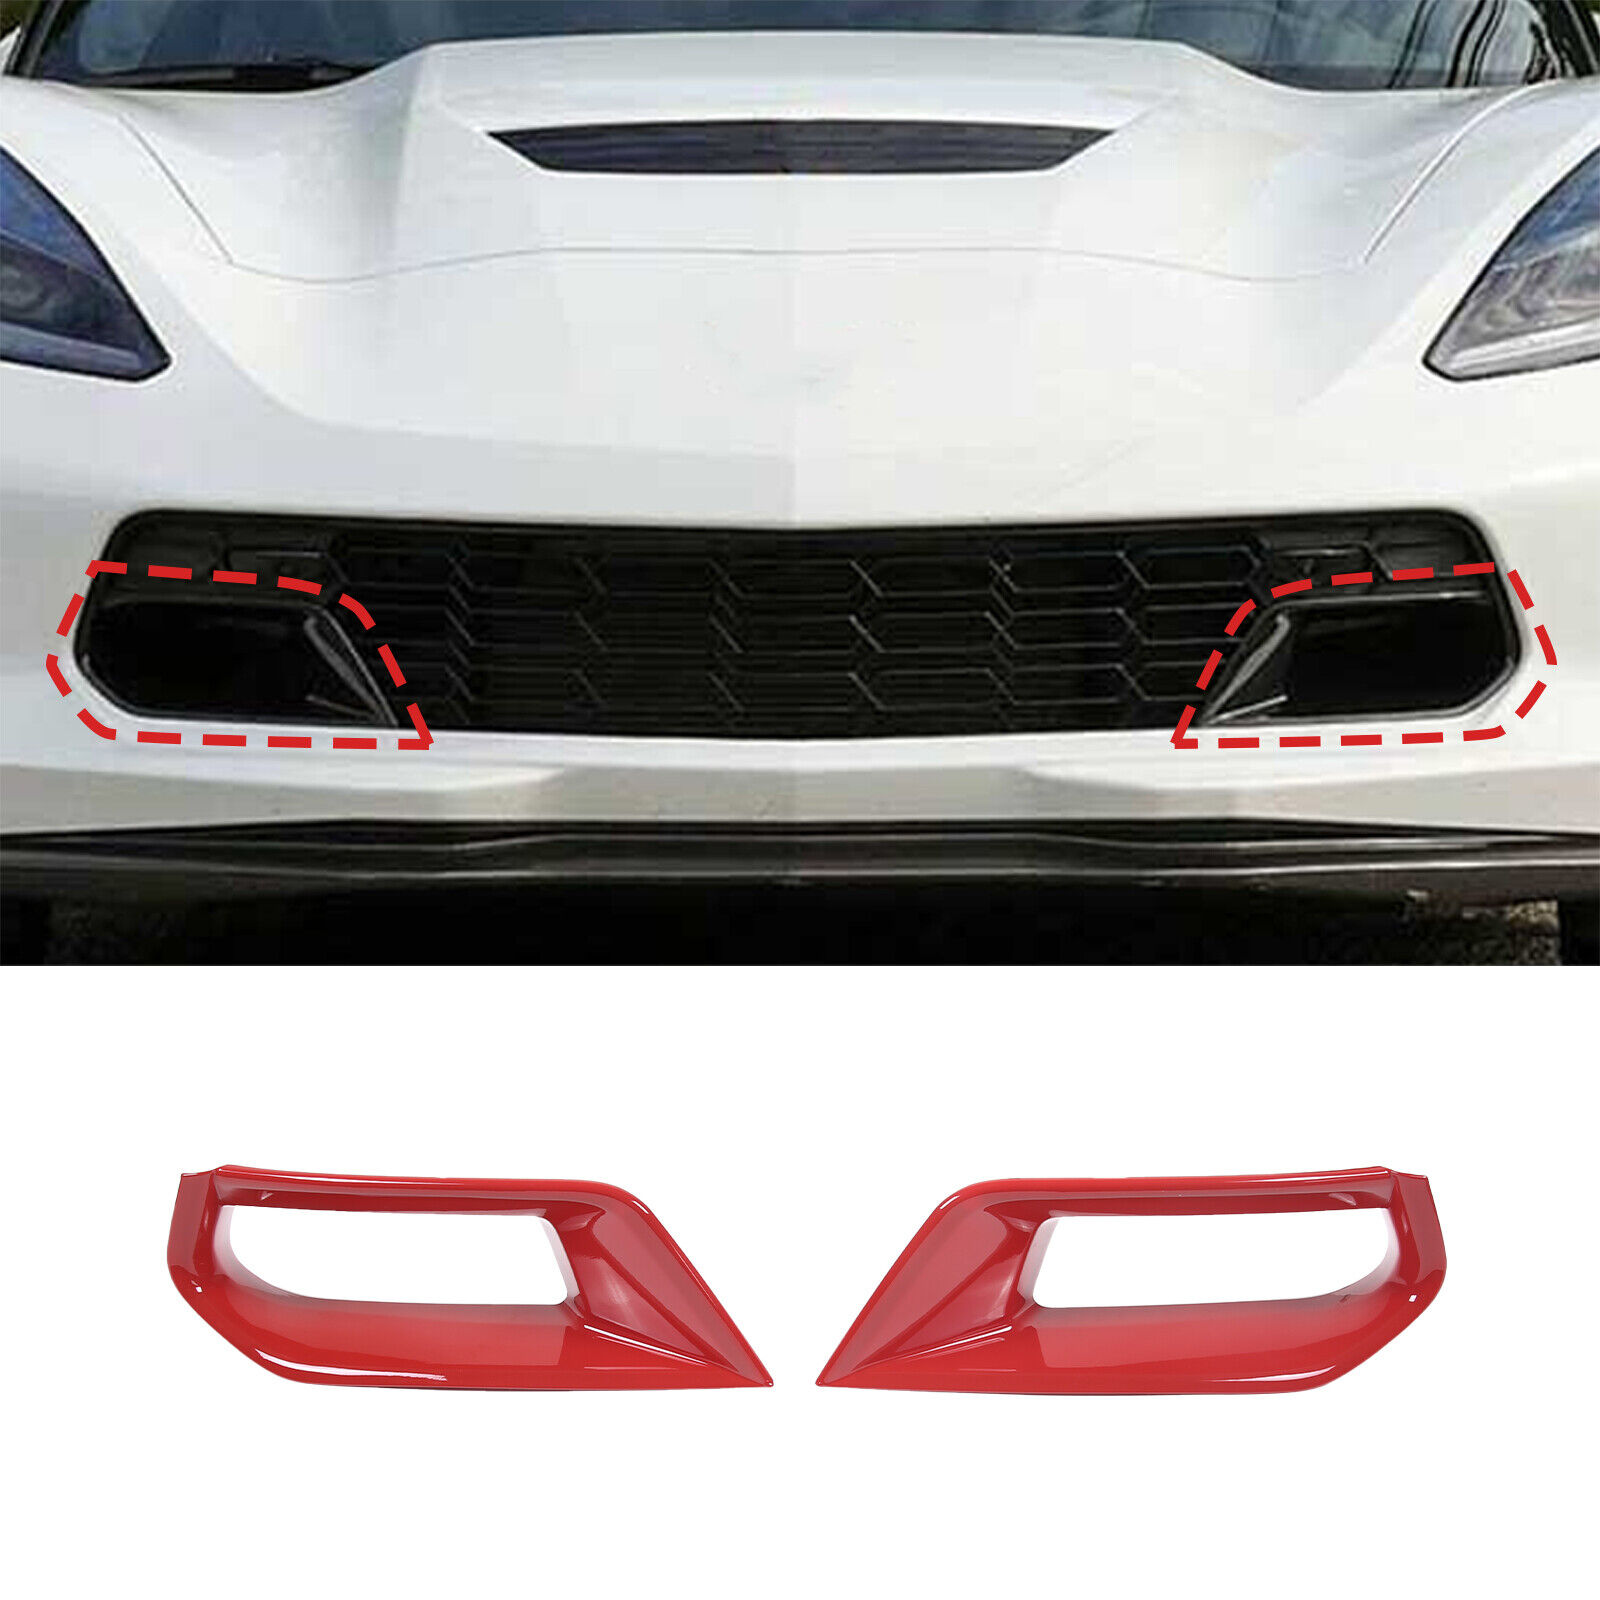 Red Front Lower Grille Air Inlet Intake Radiator Vent Trim For Corvette C7 Z06